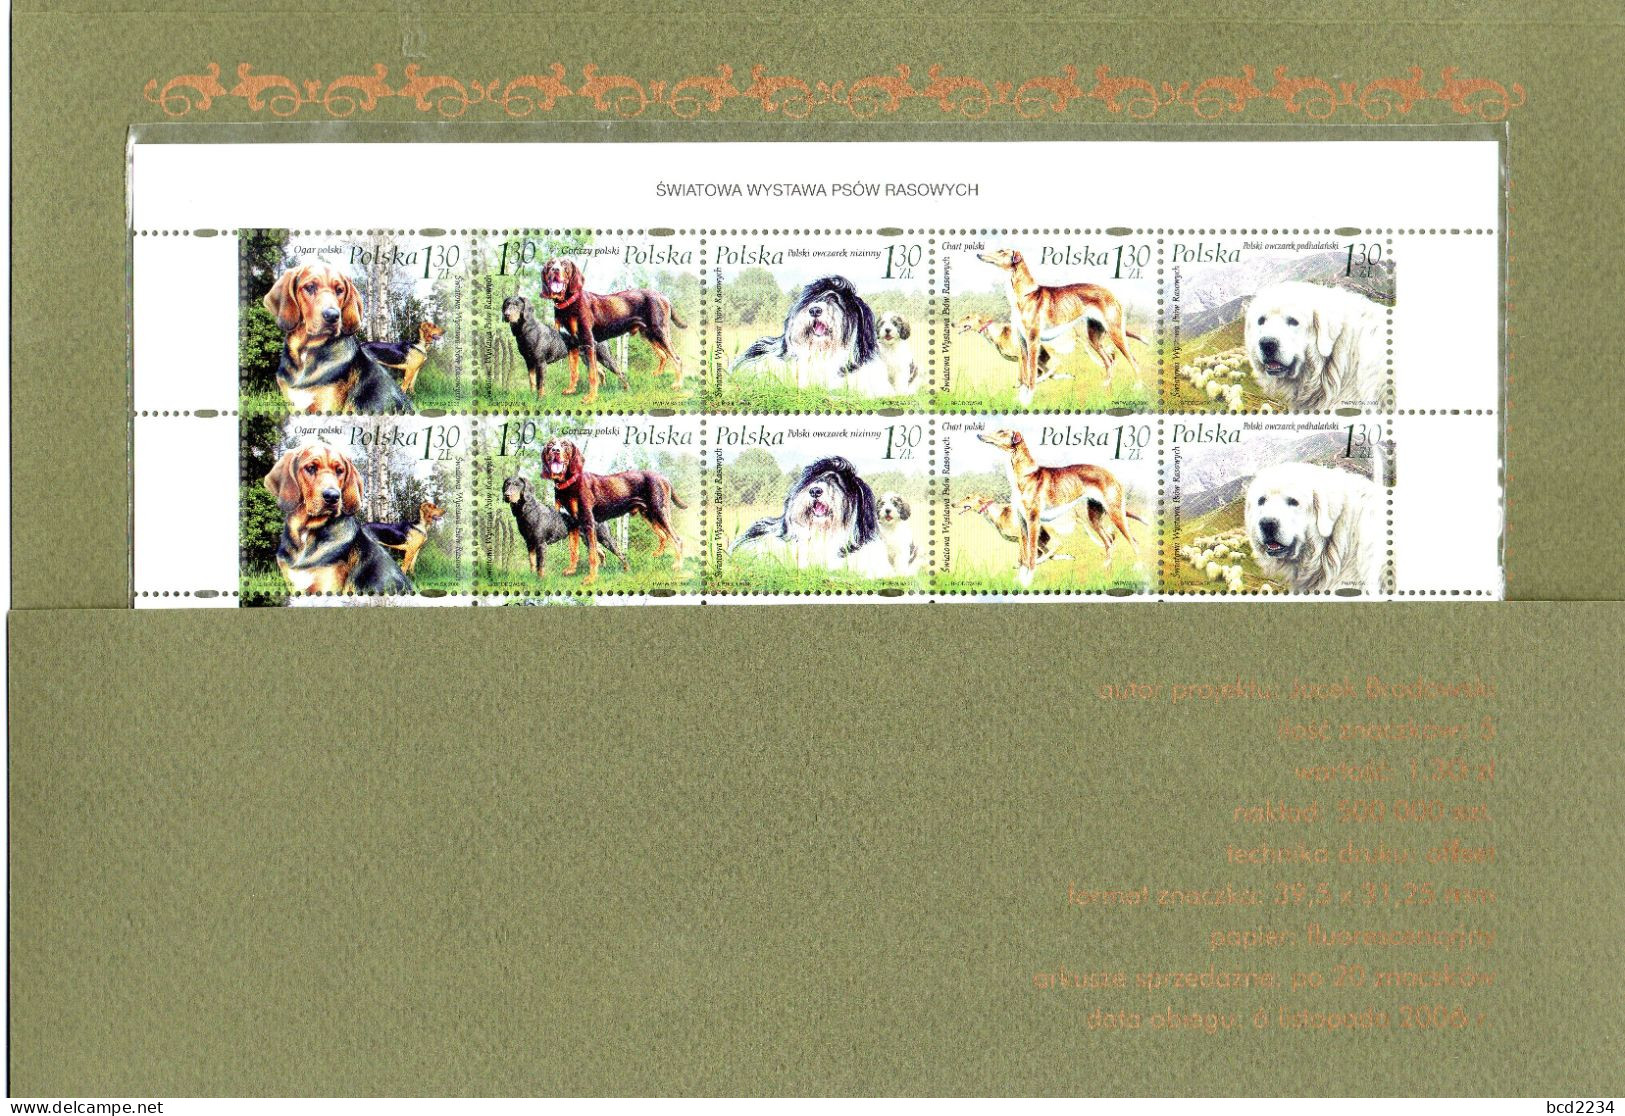 POLAND 2006 RARE POLISH POST OFFICE LIMITED EDITION FOLDER: SHEET OF 20 STAMPS OF WORLD EXHIBITION SHOW PEDIGREE DOGS - Blocks & Sheetlets & Panes